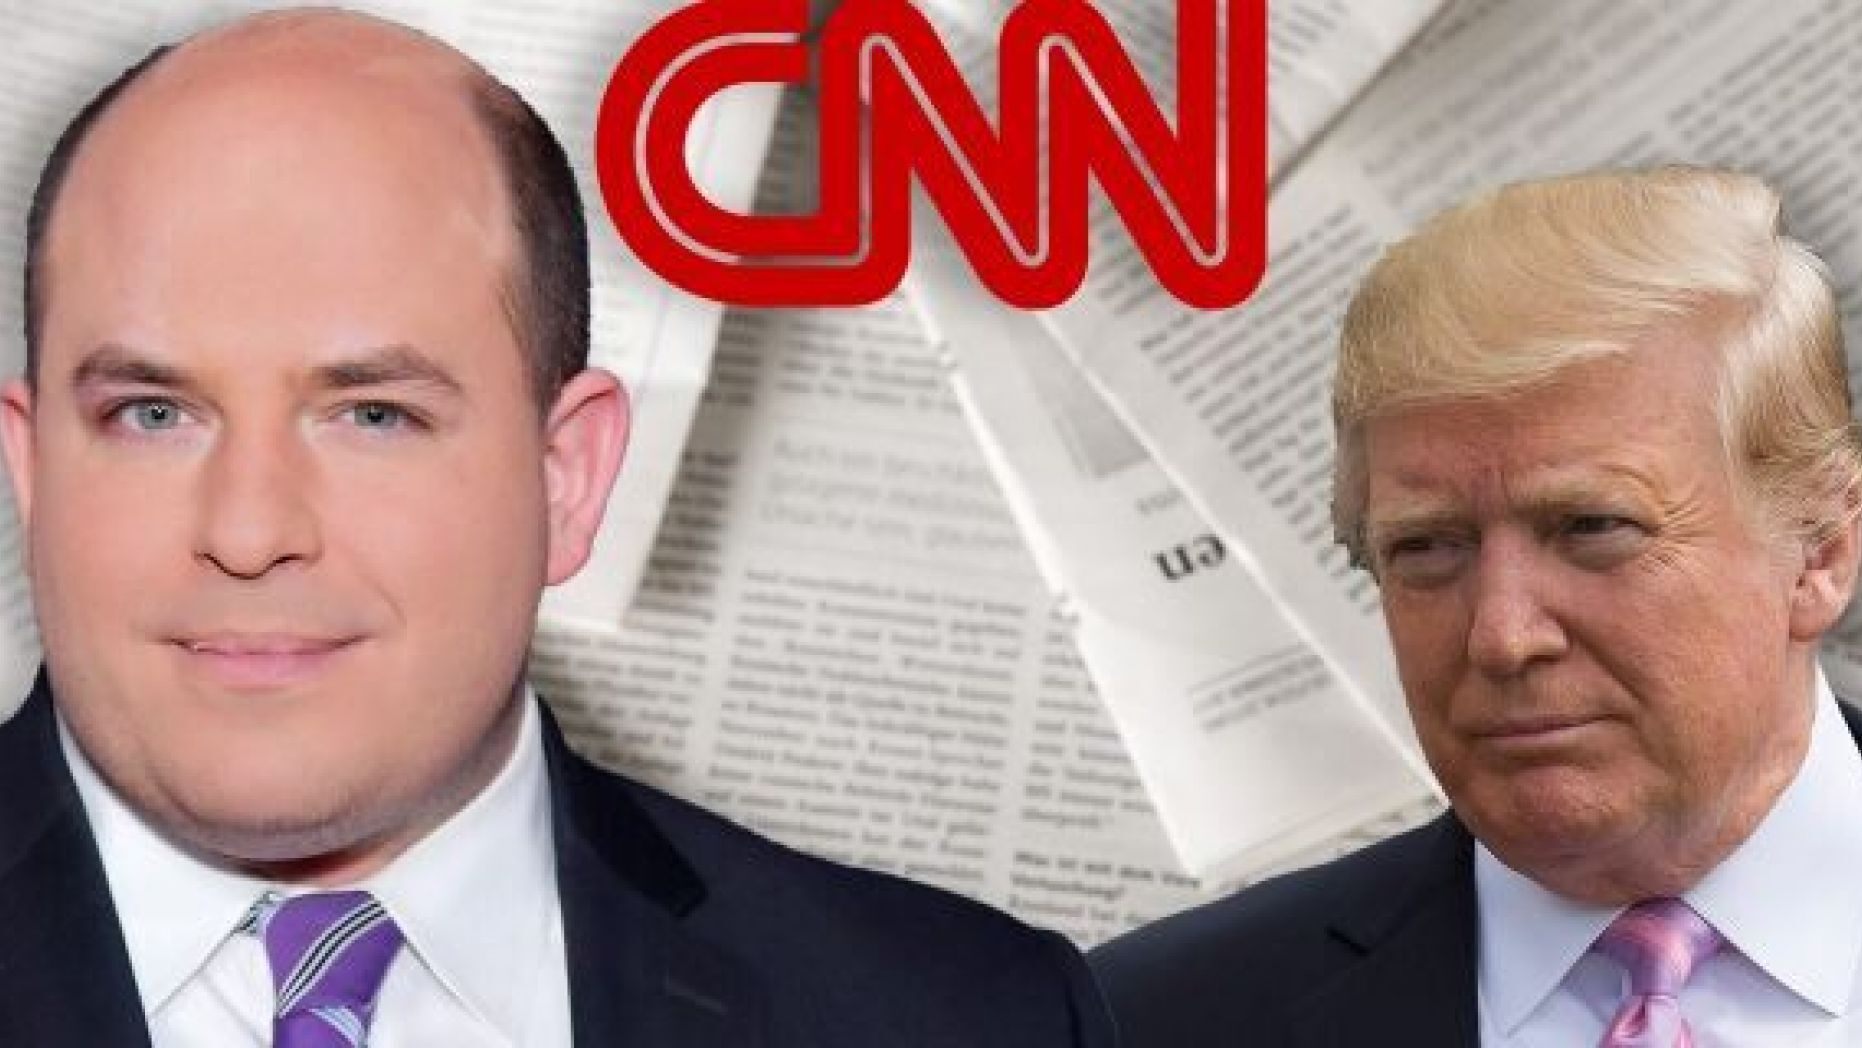 CNN pundit Brian Stelter pondered aloud if news organizations want Trump impeached for business purposes.